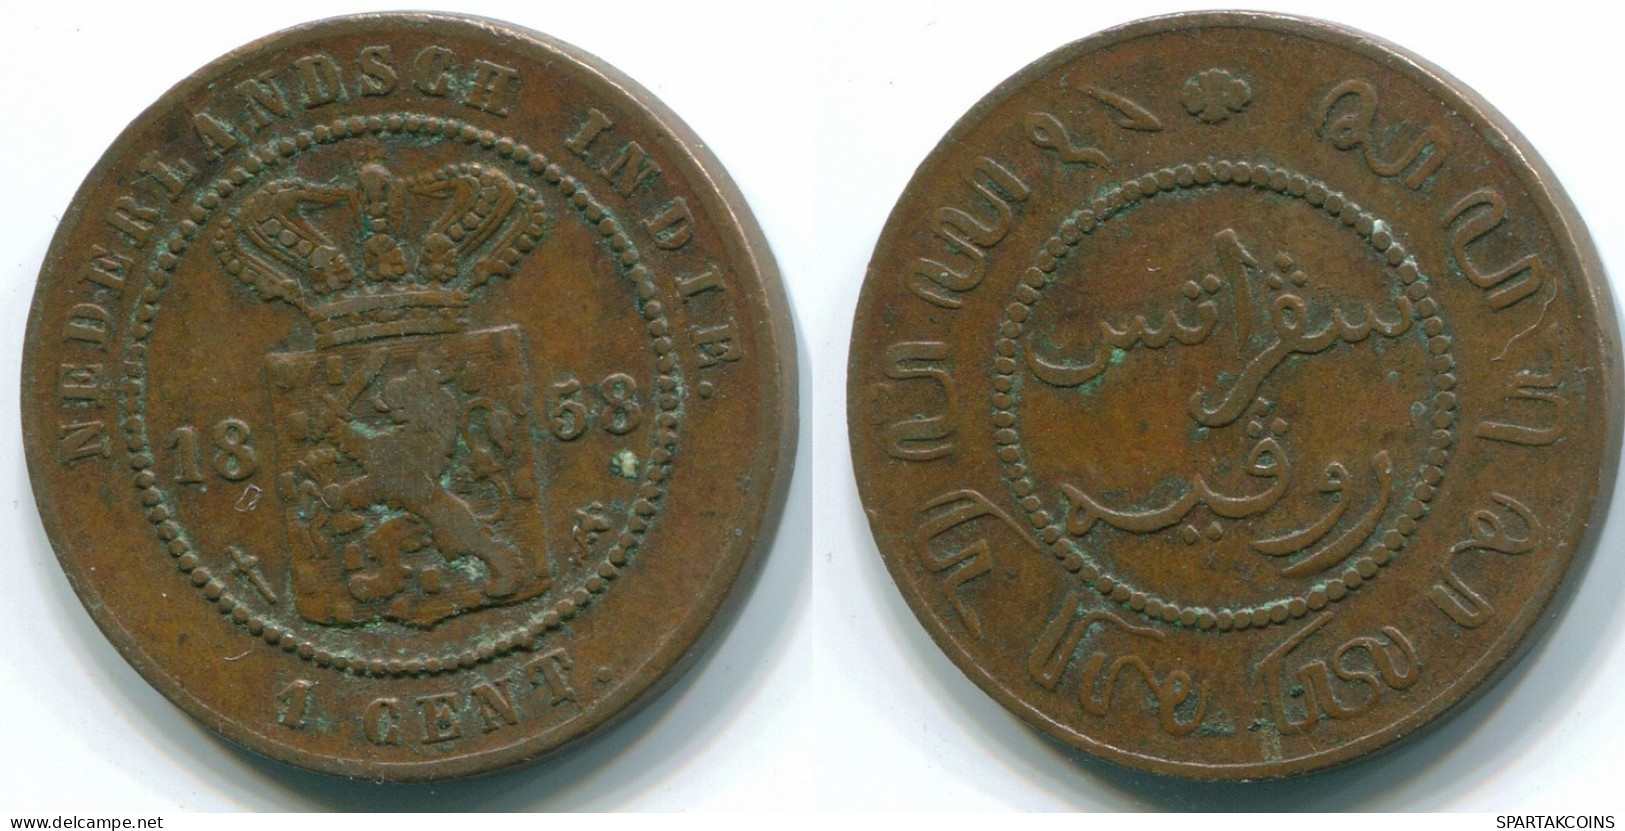 1 CENT 1858 NETHERLANDS EAST INDIES INDONESIA Copper Colonial Coin #S10006.U.A - Indes Néerlandaises